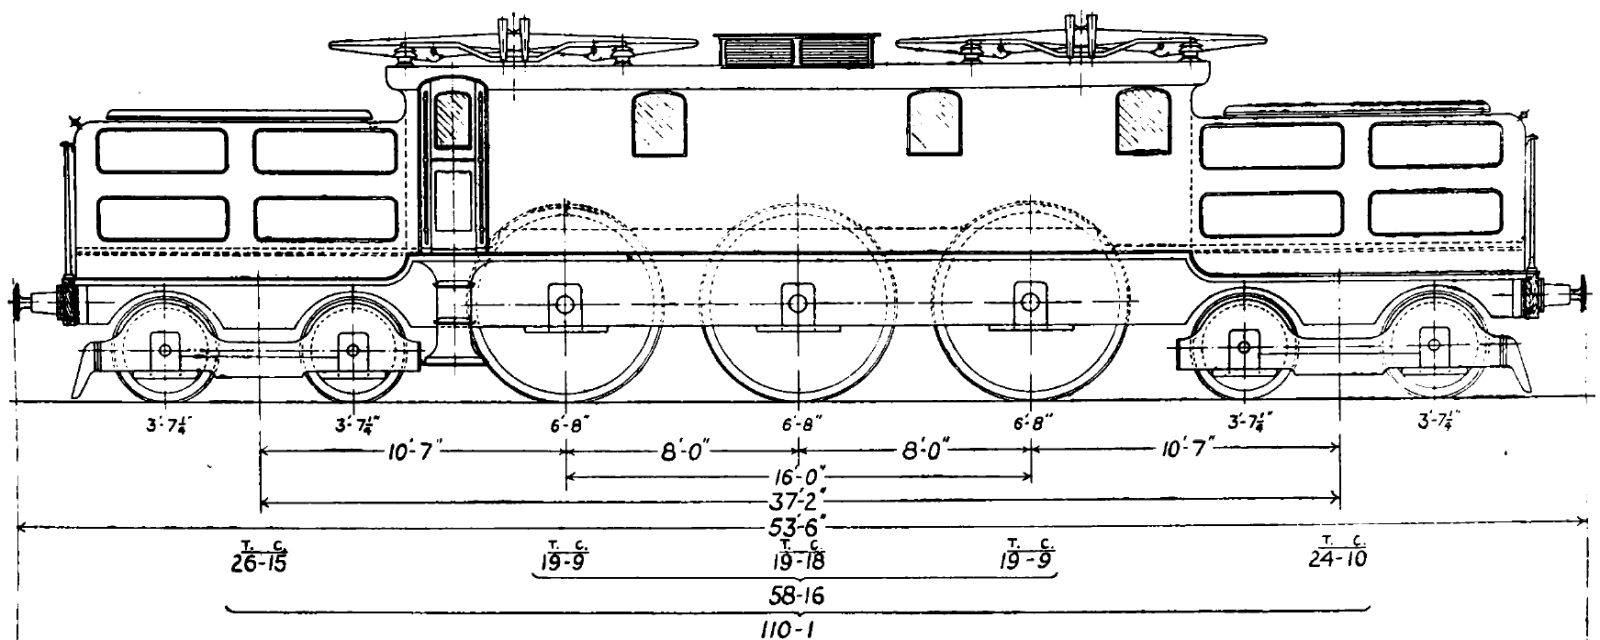 Schematic drawing with dimensions